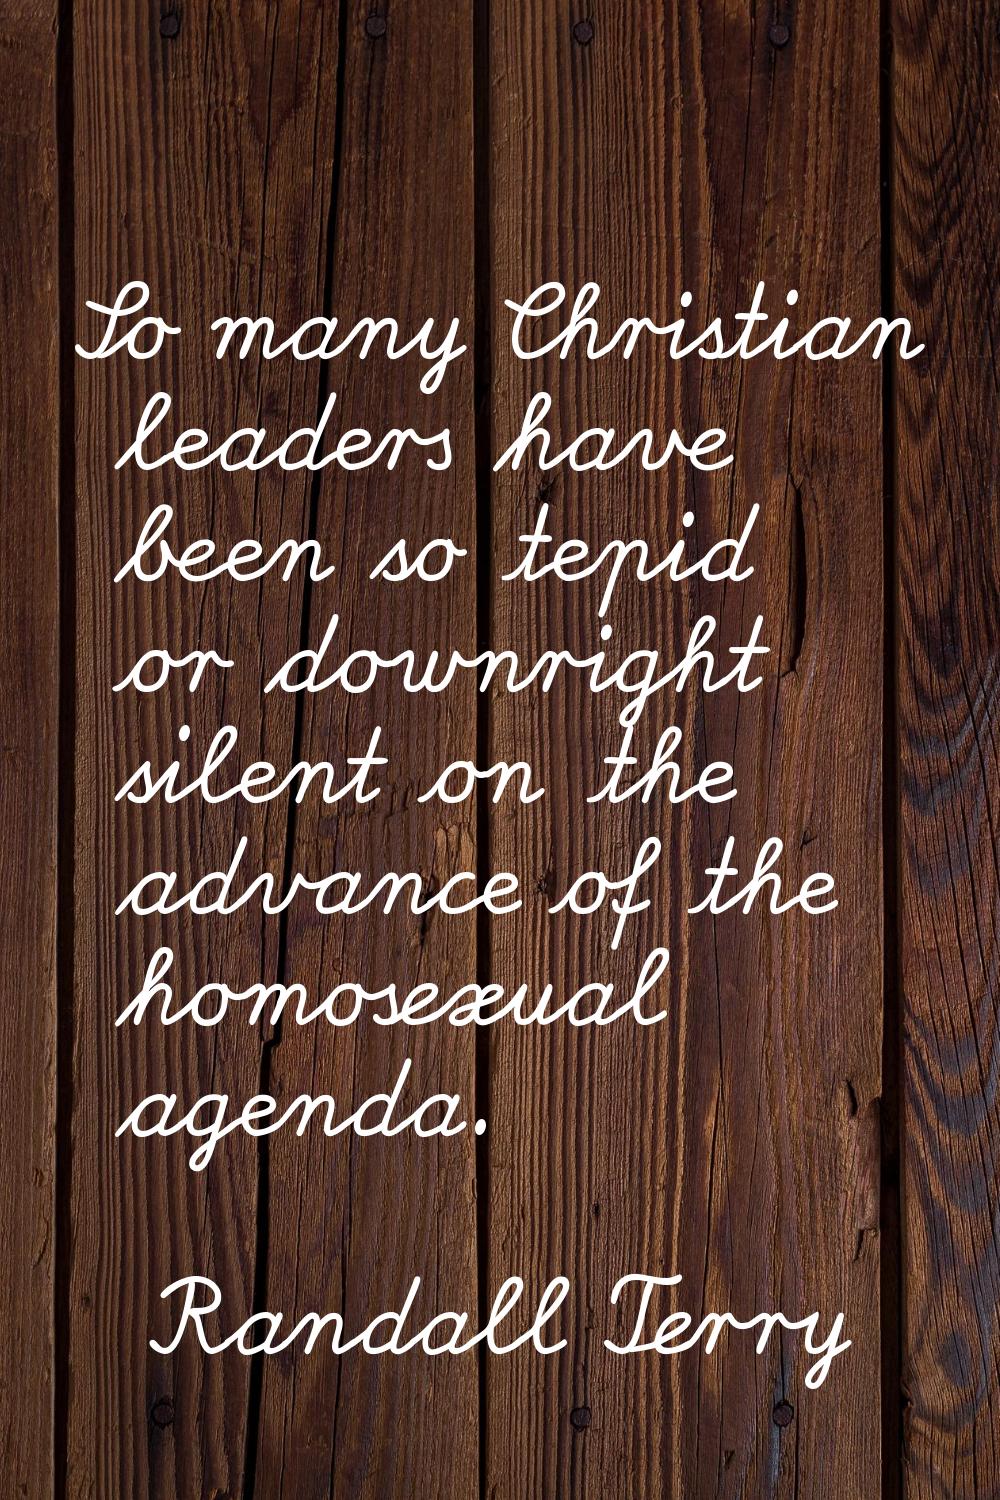 So many Christian leaders have been so tepid or downright silent on the advance of the homosexual a